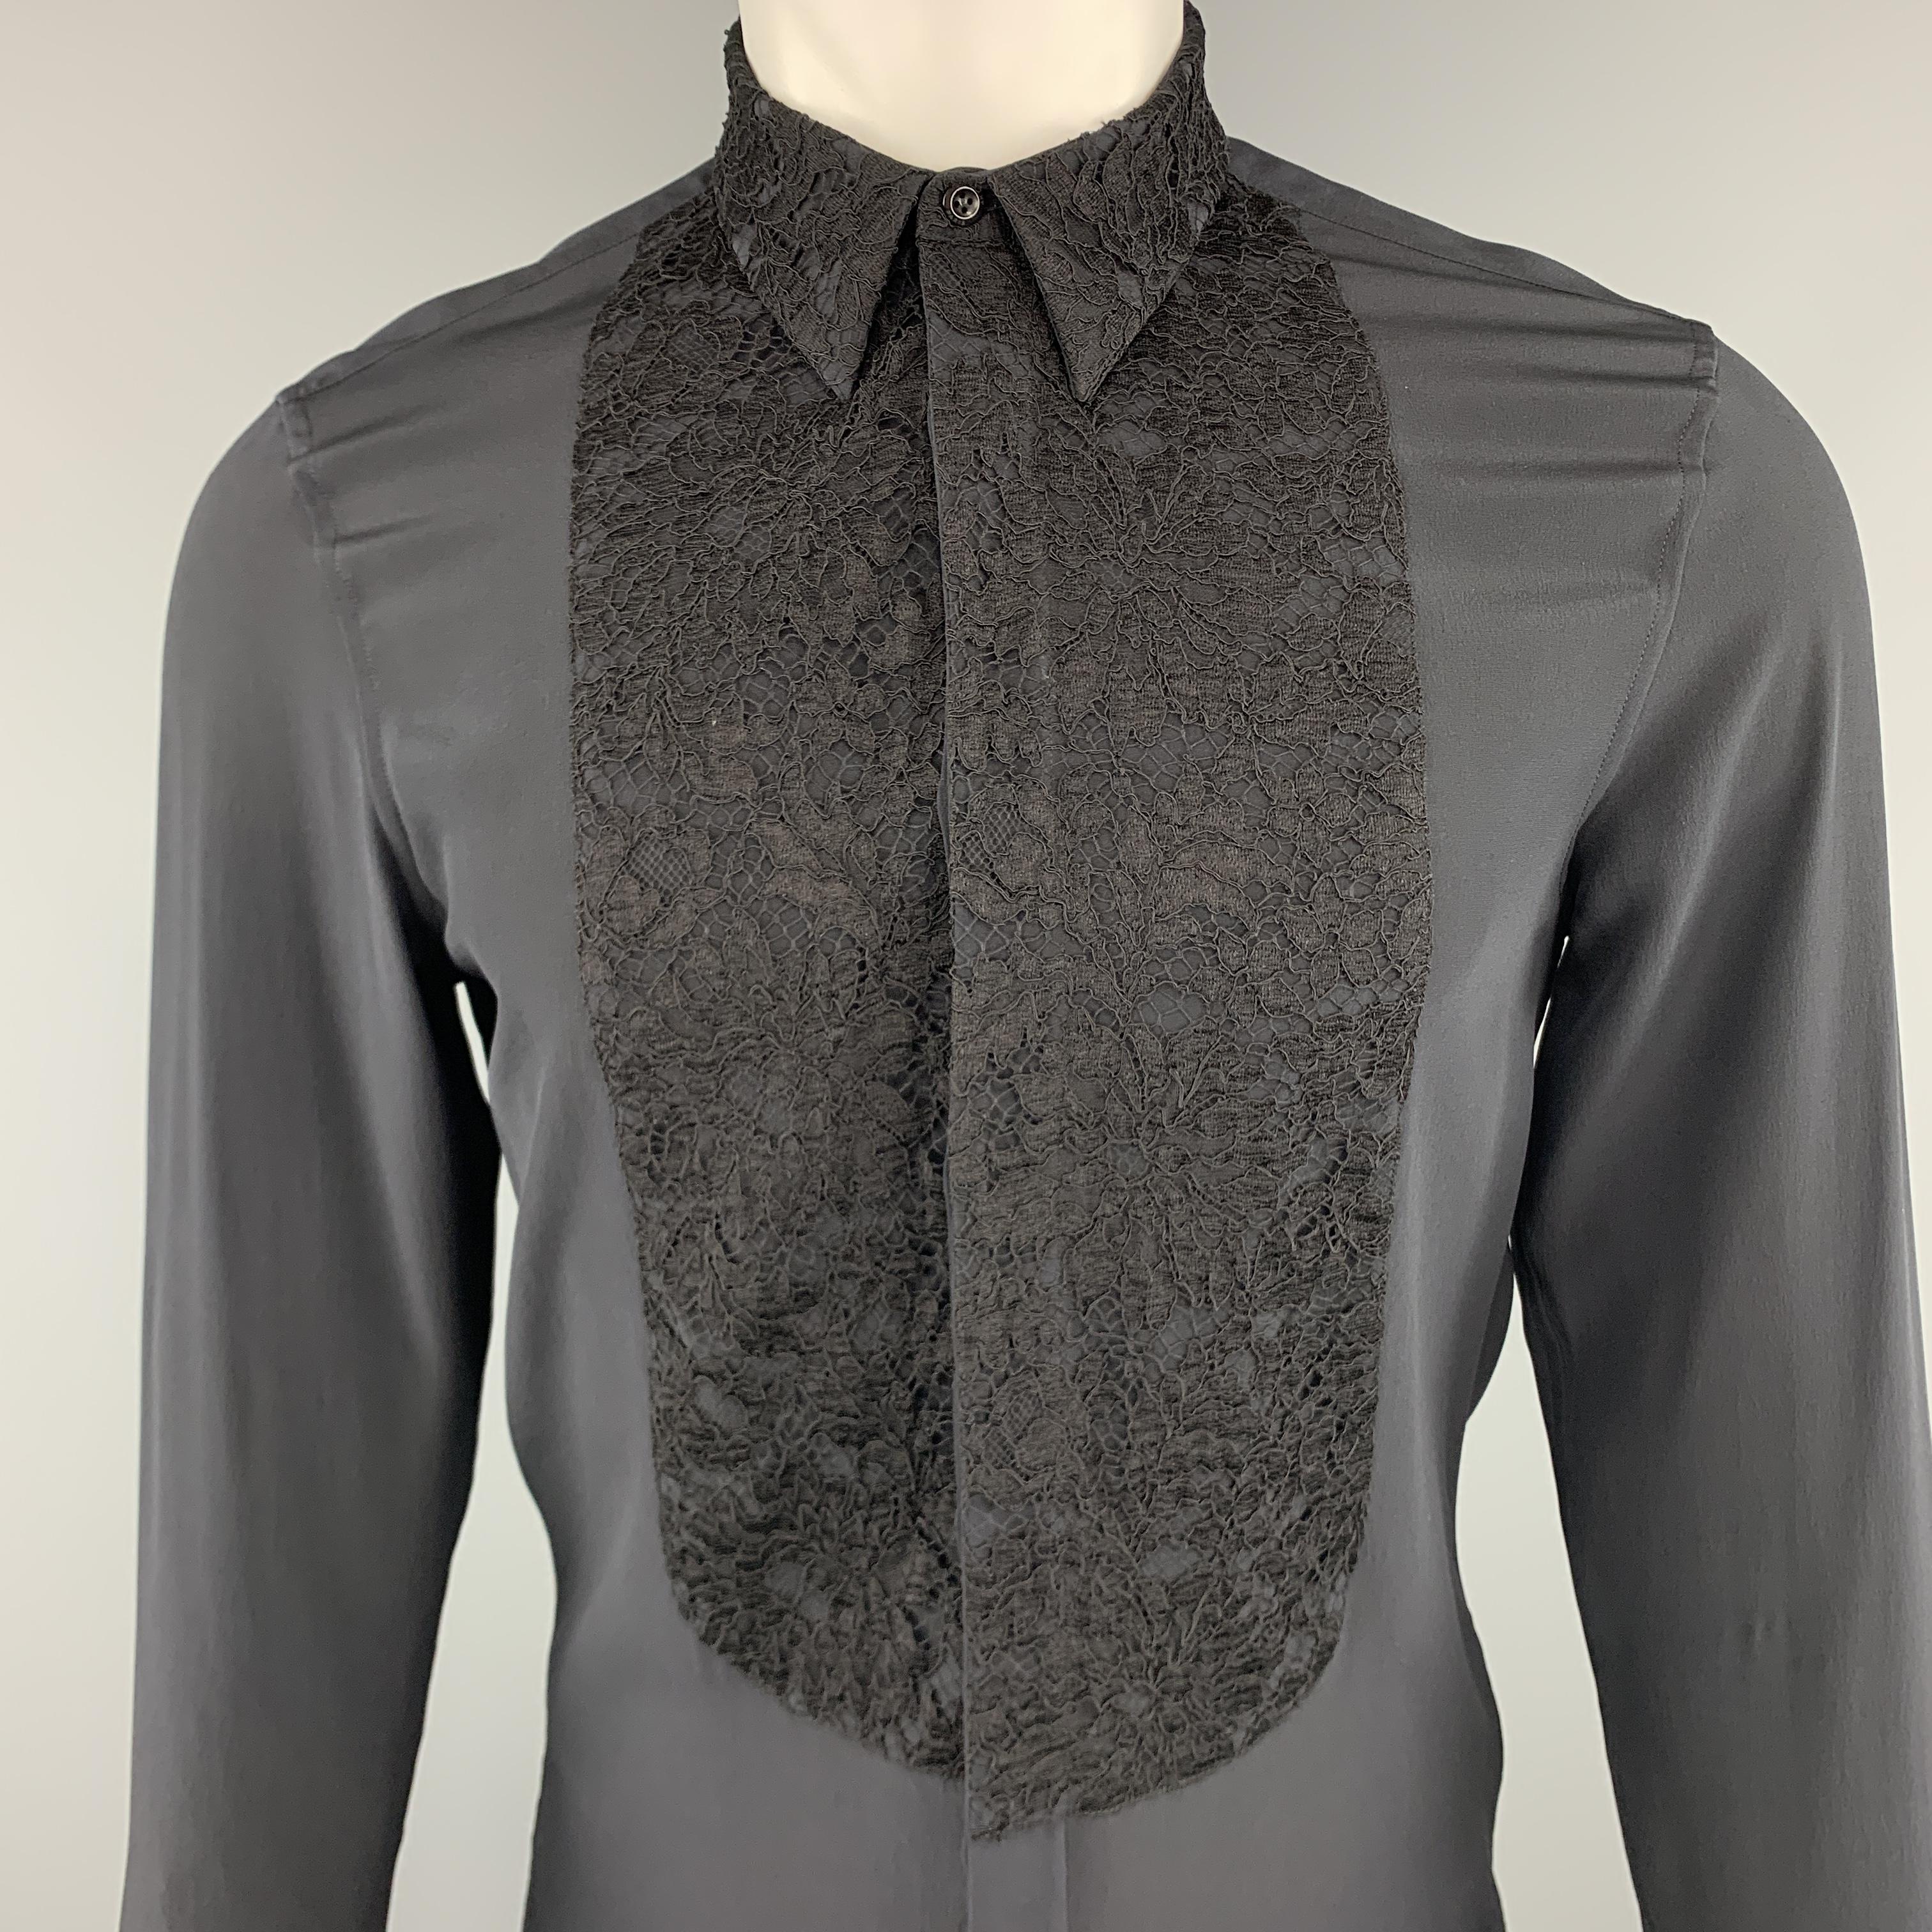 GIVENCHY by RICCARDO TISCI shirt comes in light weight black silk crepe with a hidden placket button up front, lace bib and cuff appliques, and T stitch back. Made in Italy.

Excellent Pre-Owned Condition.
Marked: 39

Measurements:

Shoulder: 16